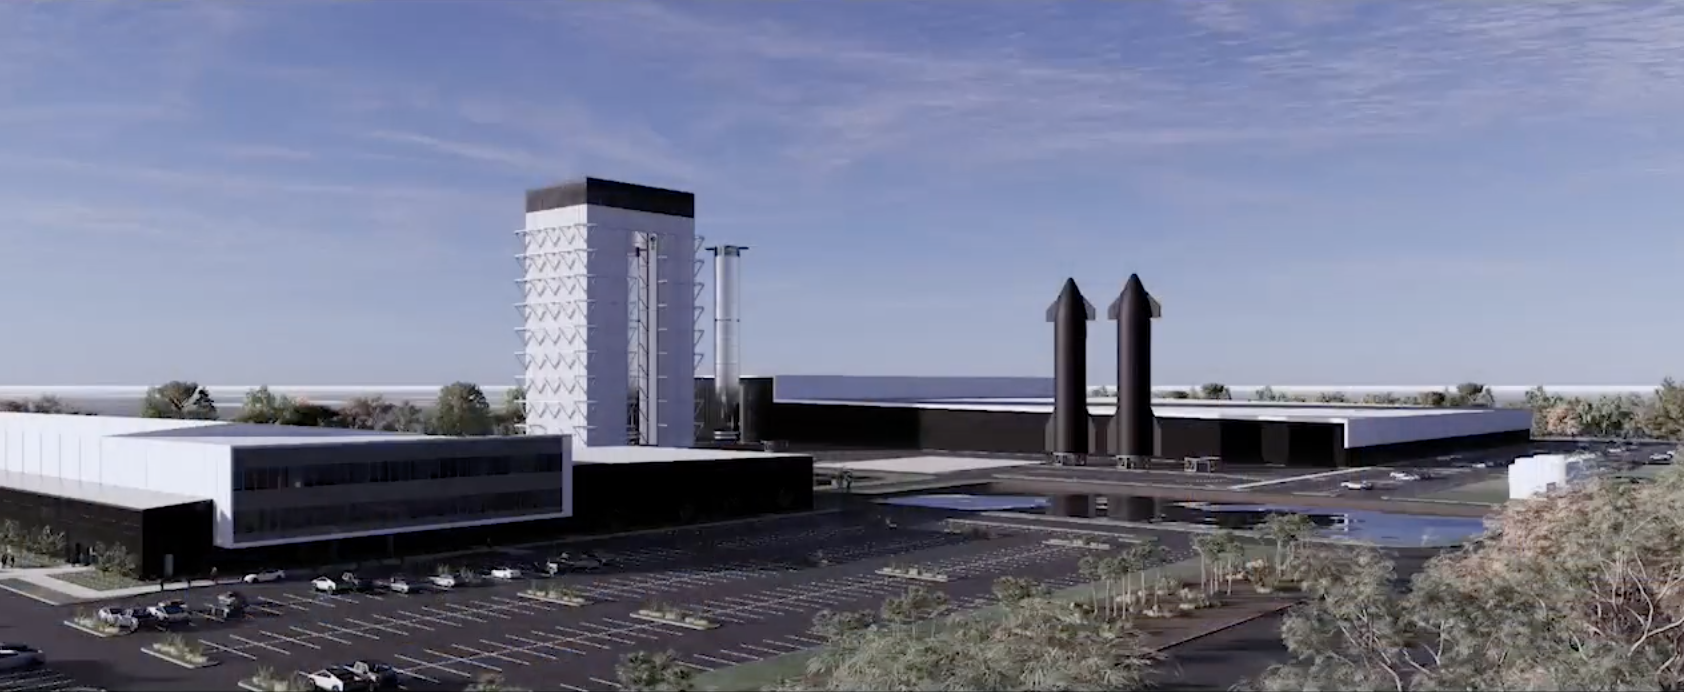 Conceptual image of a future SpaceX facility at Cape Canaveral in Florida.  (Image: SpaceX)